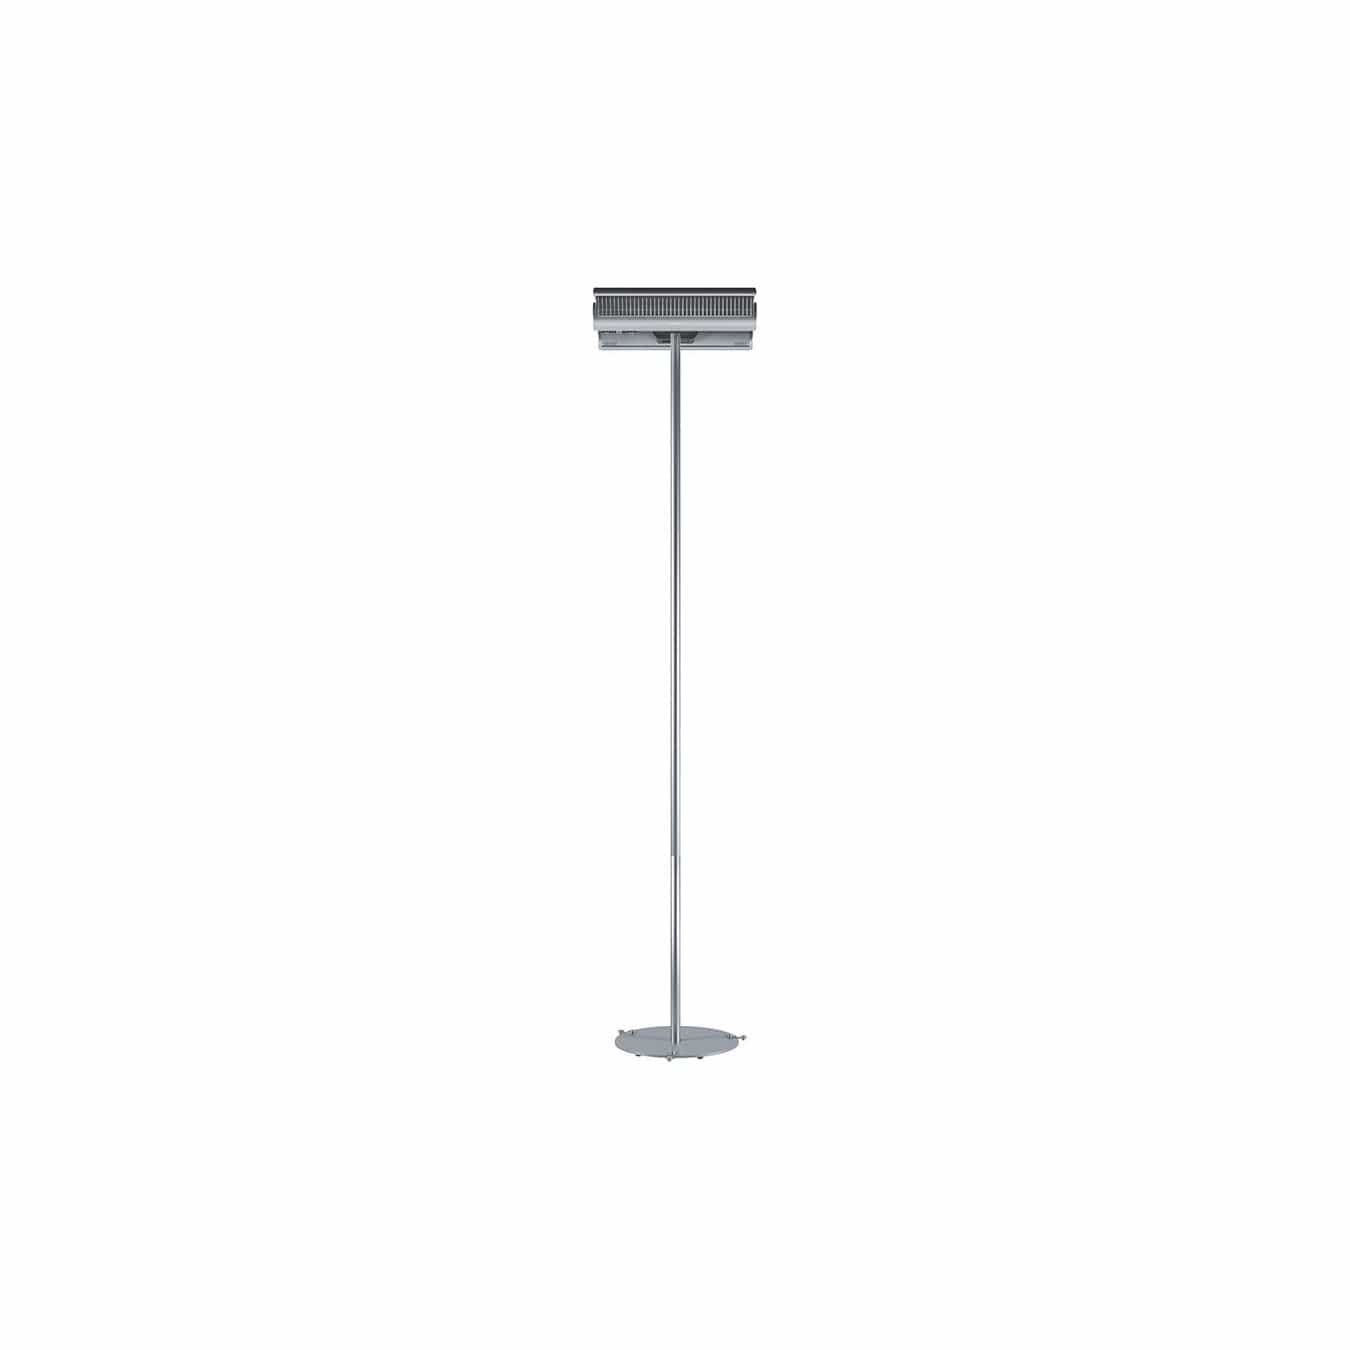 Dimplex Dimplex Permanent Floor Stand for the DSH Indoor/Outdoor Electric Infrared Heater, DSHSTAND Heater Accessory DSHSTAND